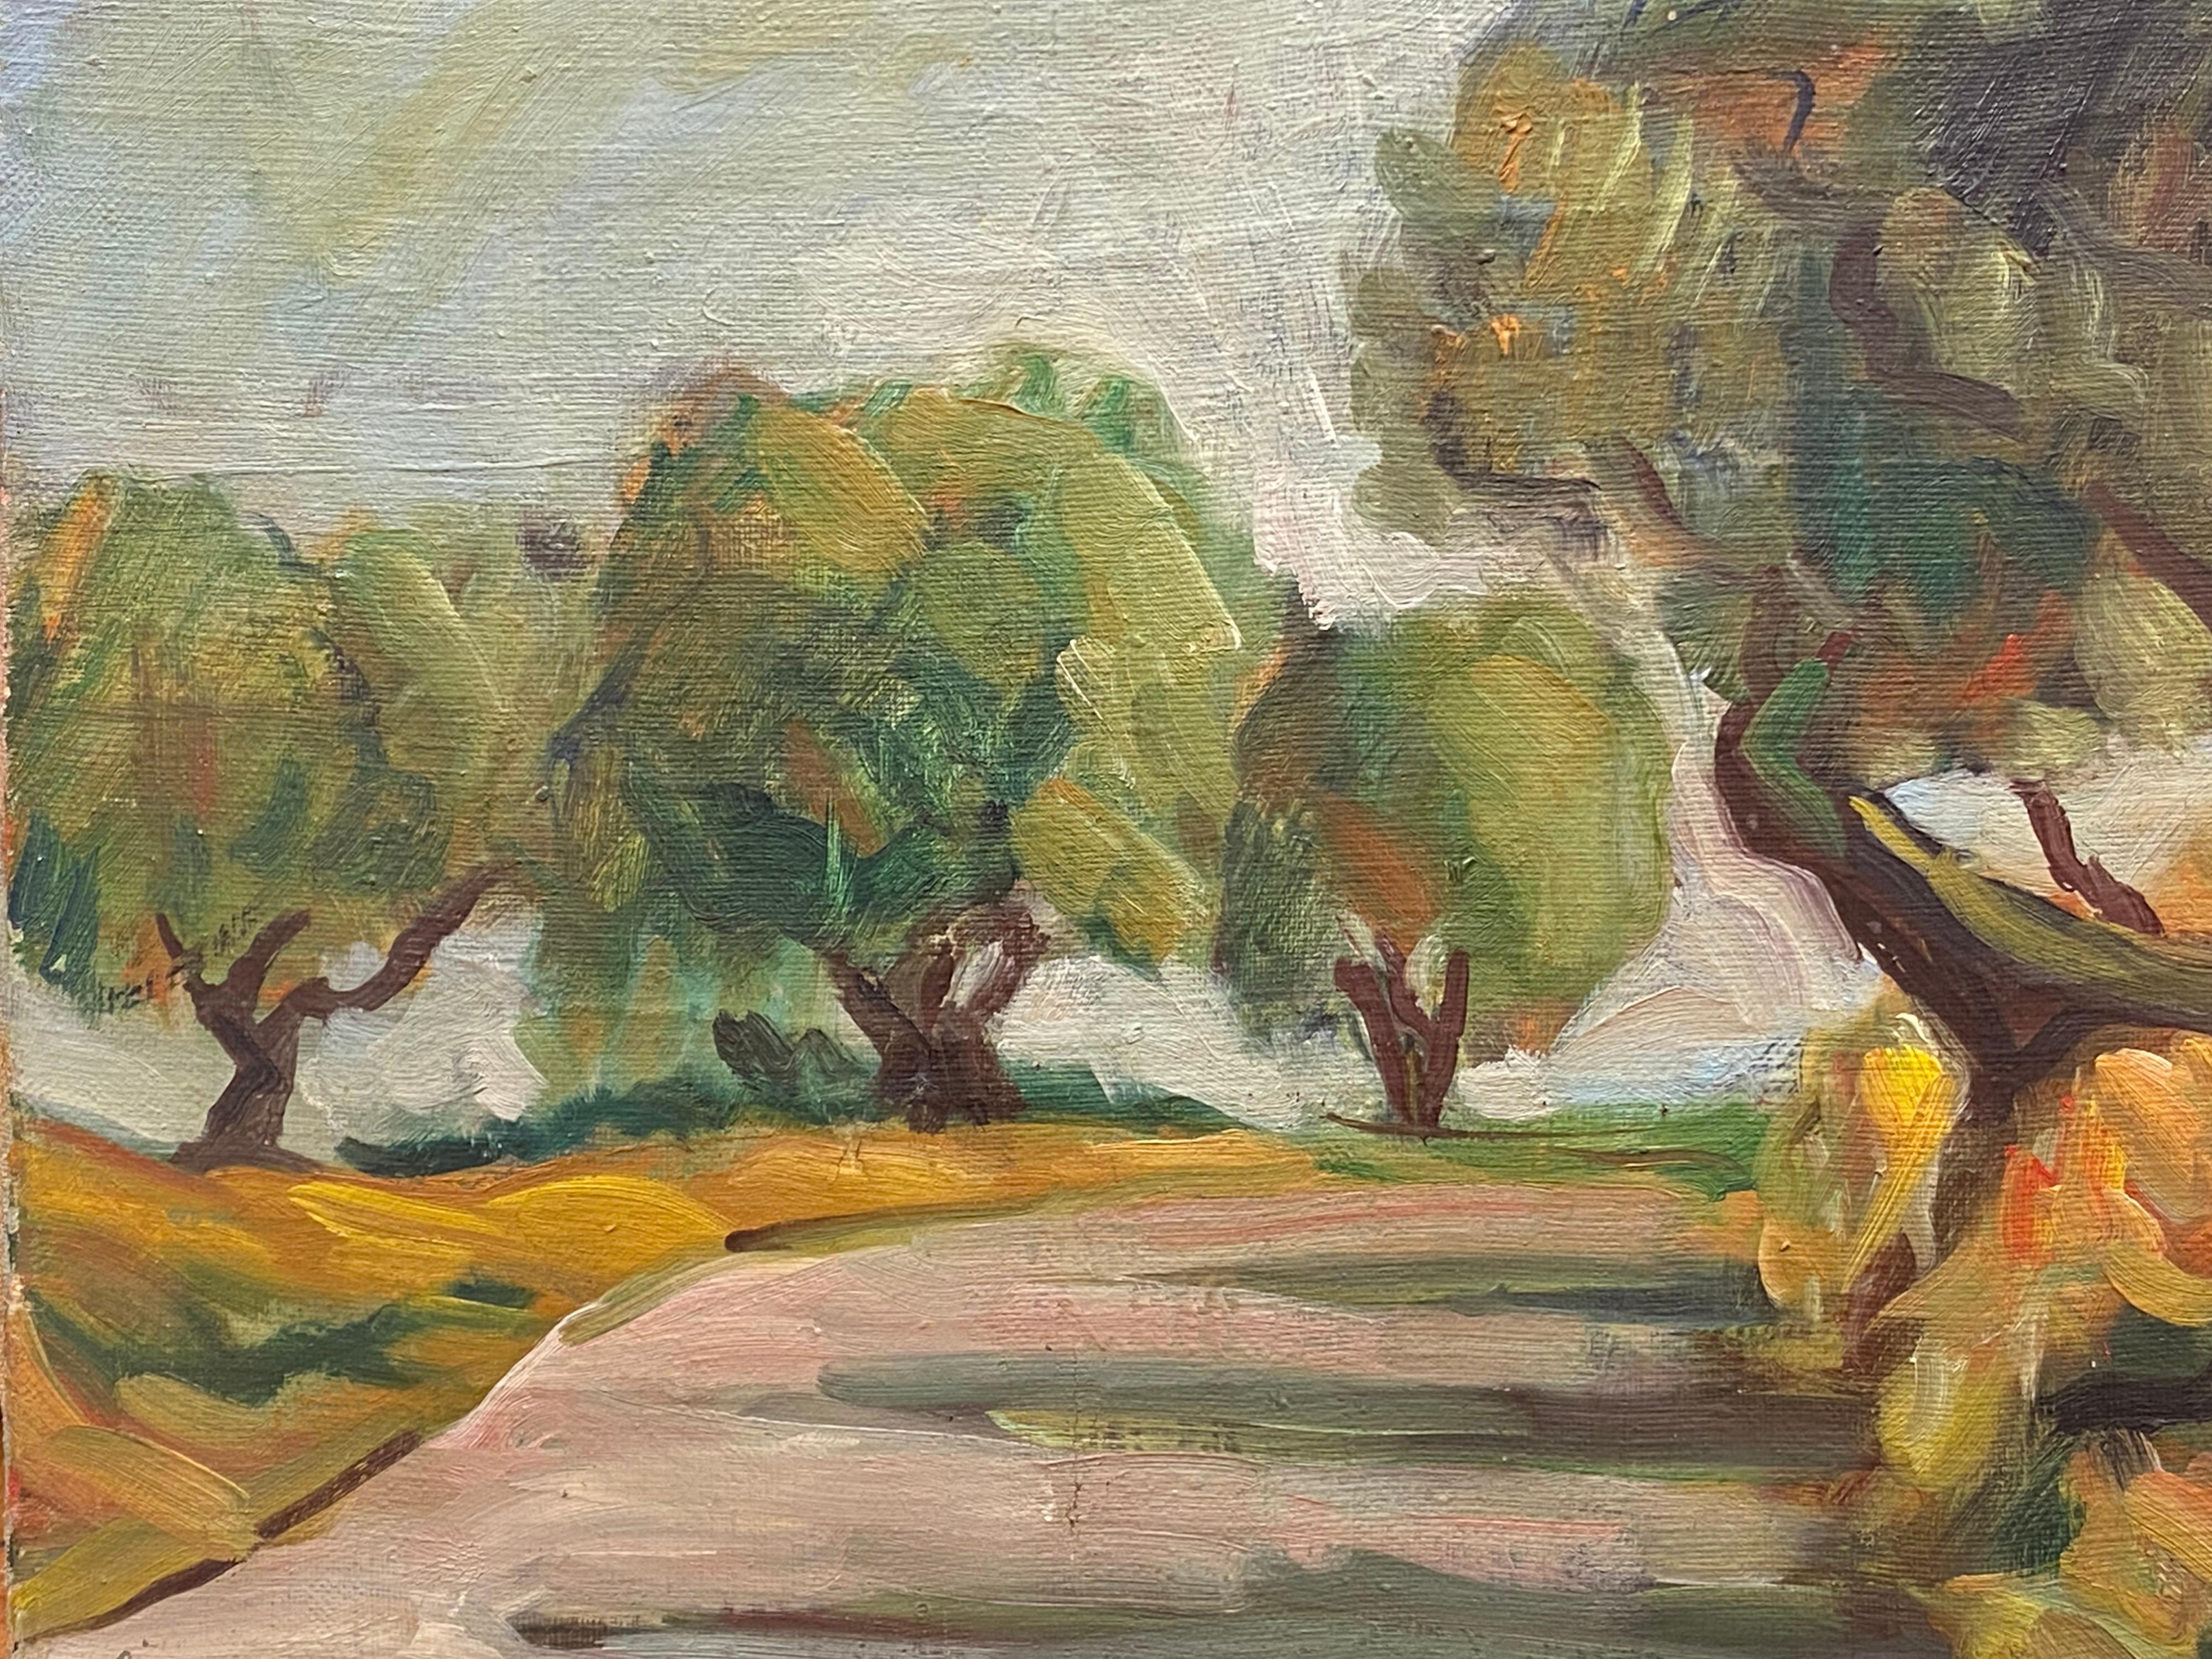 The Evening Sun
French landscape
French School, mid 20th century
oil painting on canvas, unframed
measures: 10.5 x 14.5 inches
condition report: very good
provenance: from a collection in France
